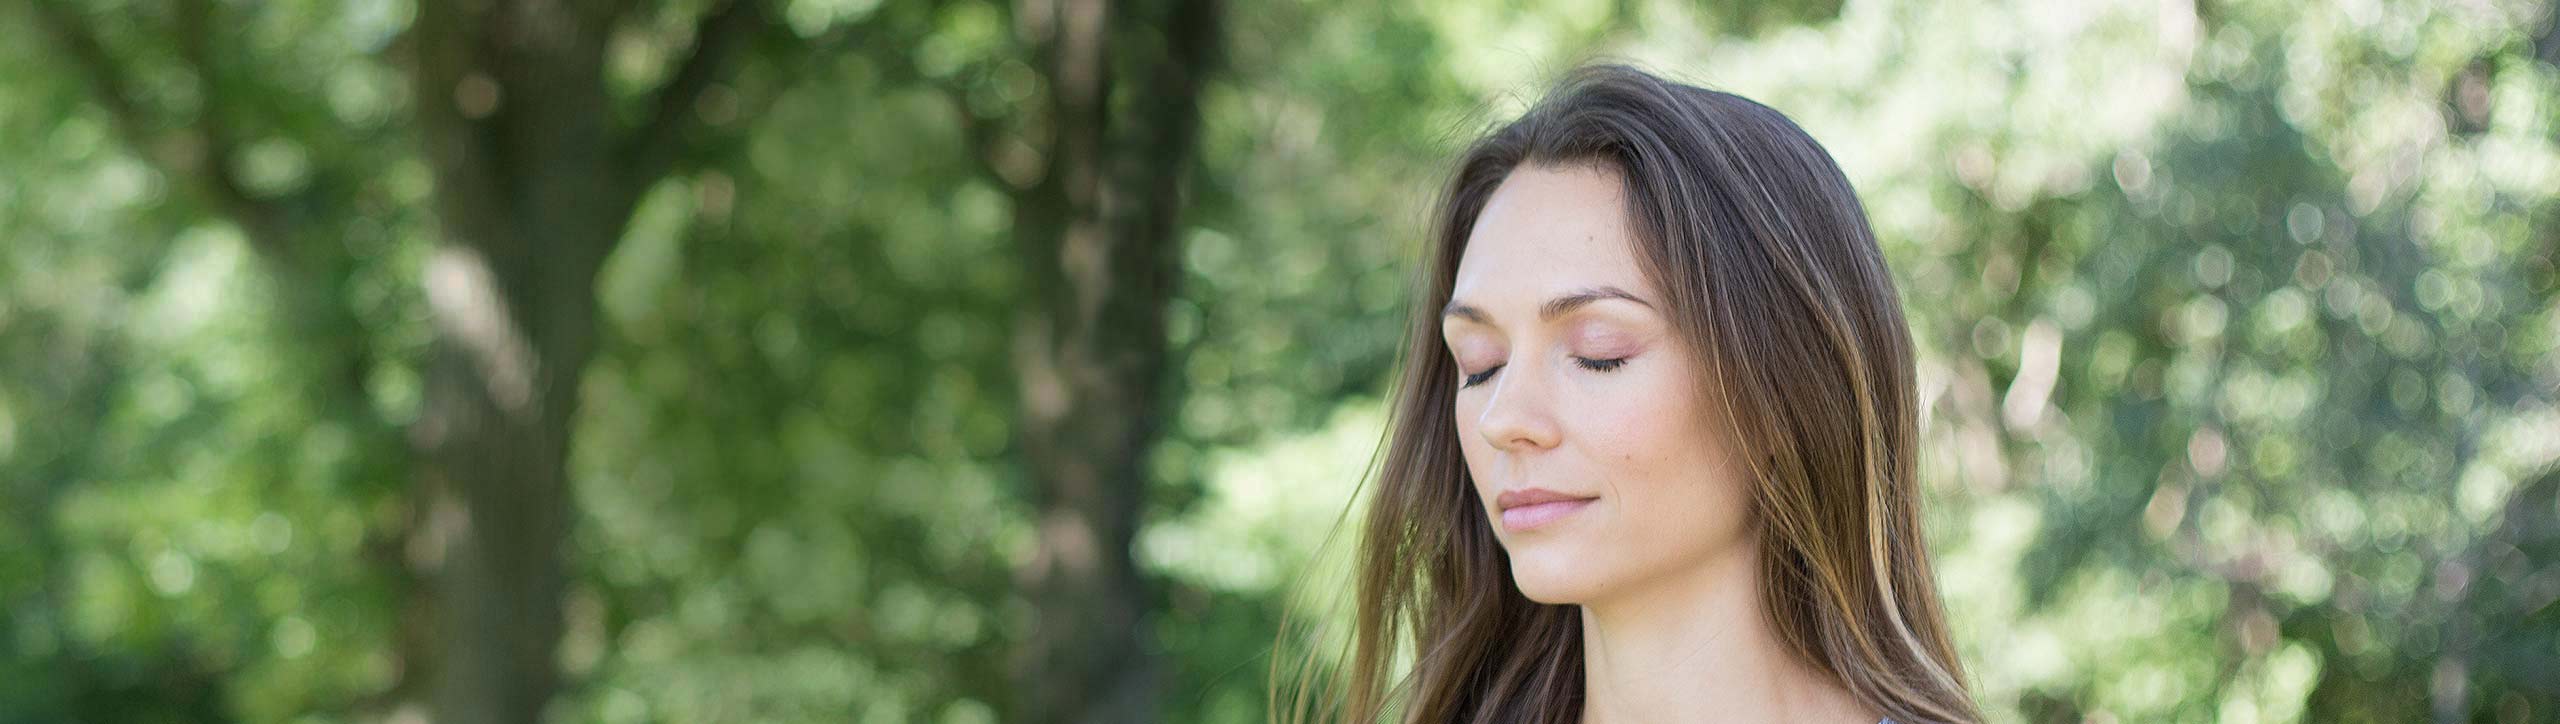 The technique for inner peace and wellness